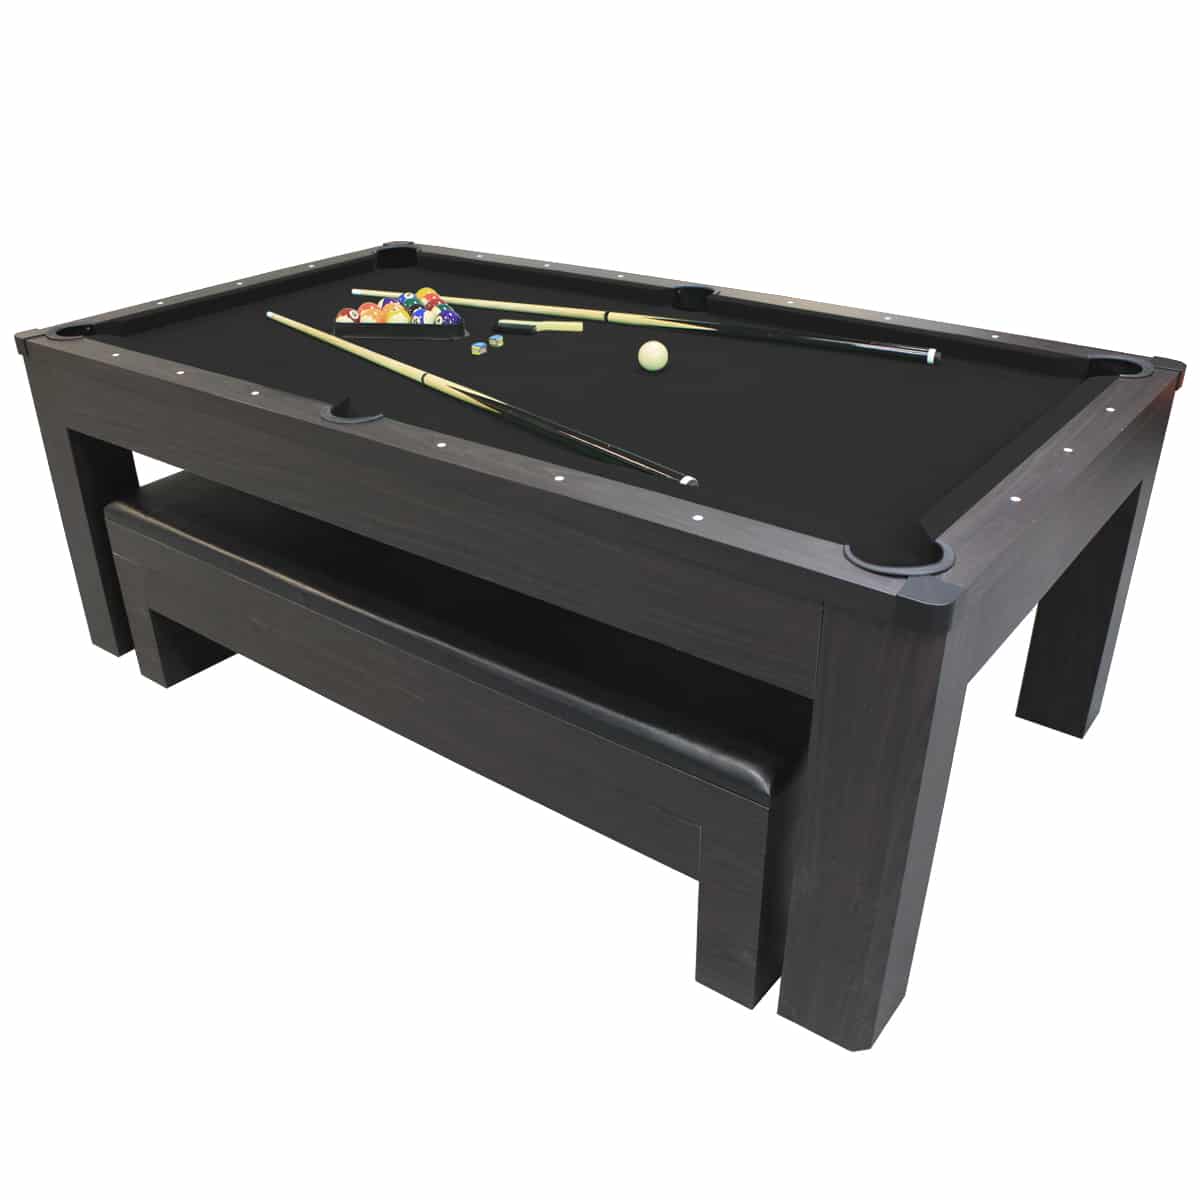 Exploring Cheap 7 Foot Pool Table - Affordable Entertainment